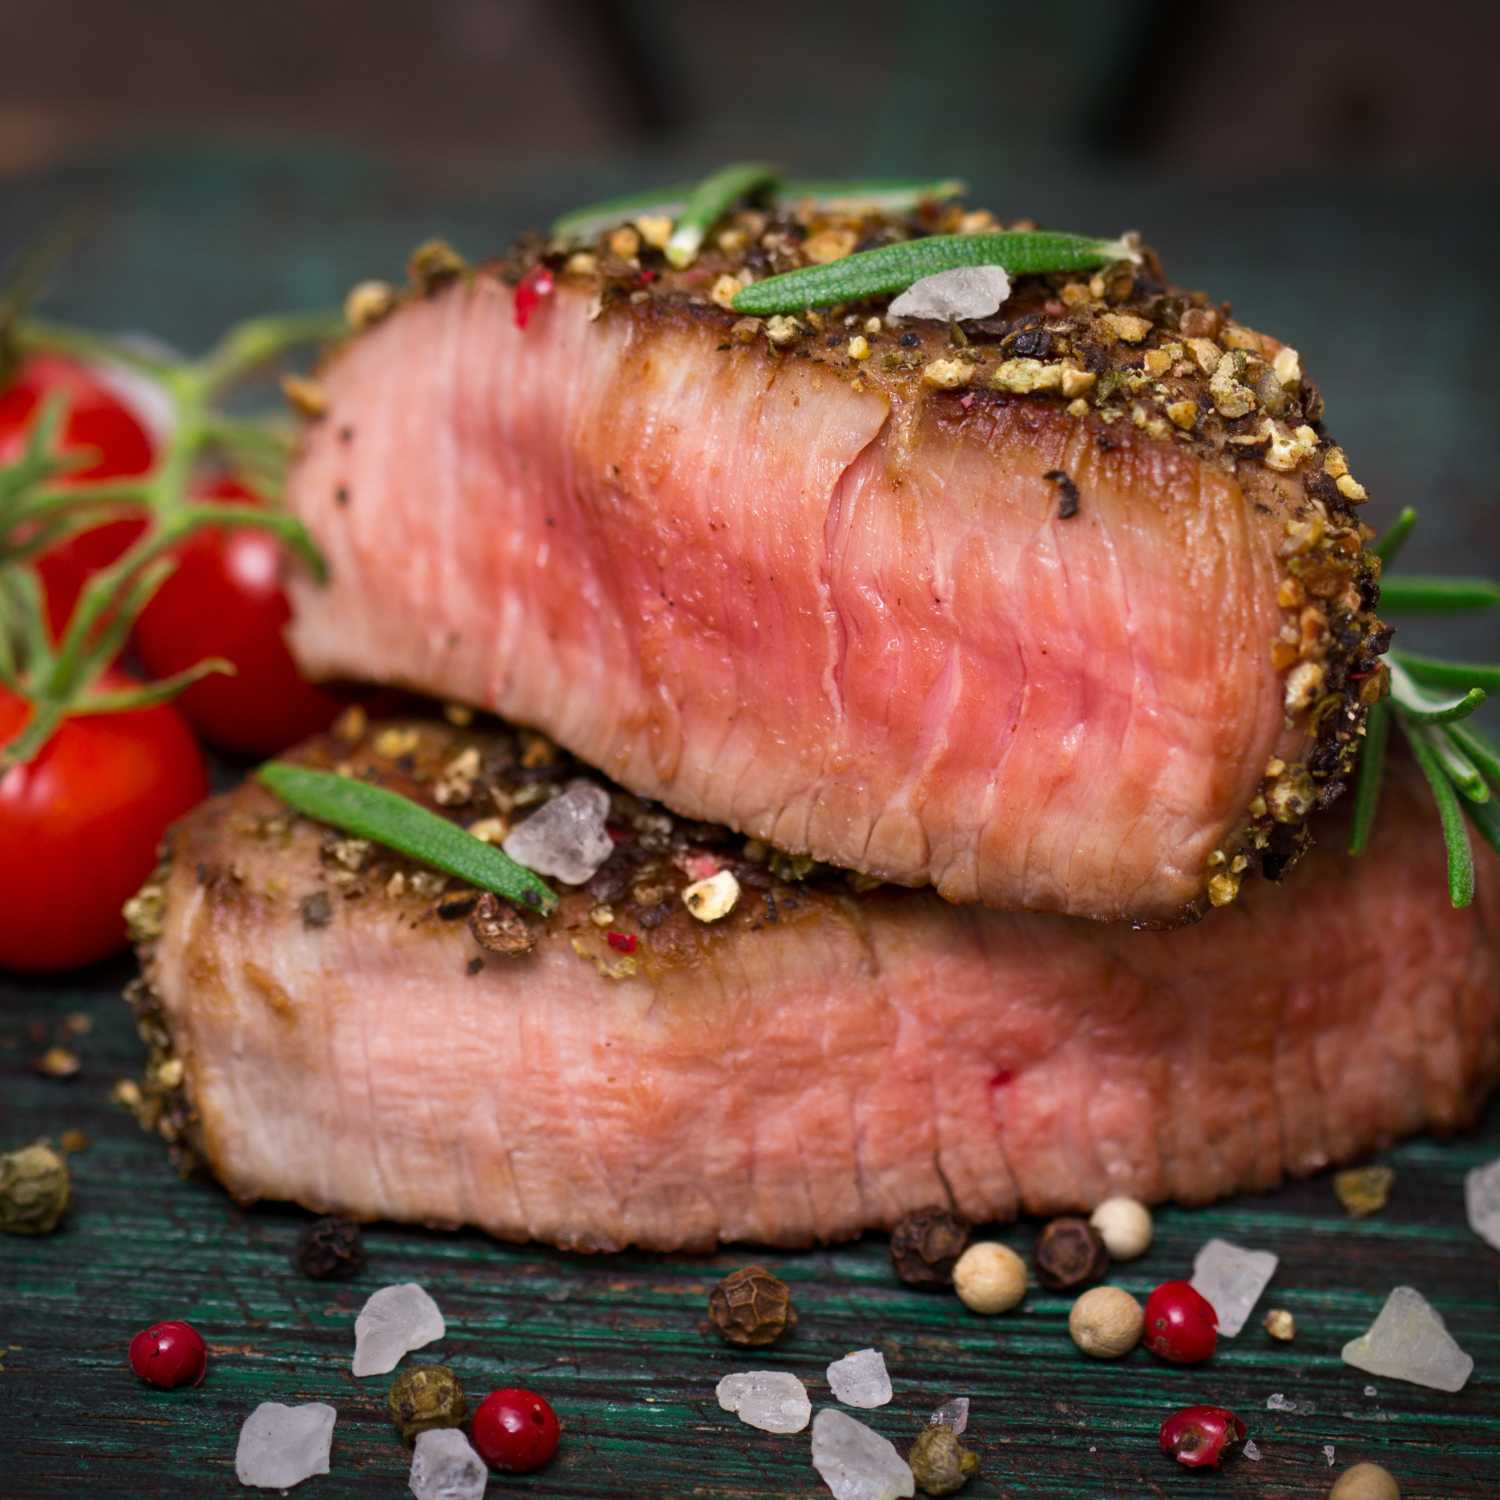 Savor the Finest: Cooking Tips for Grass Fed Beef from Meat King in Hong Kong